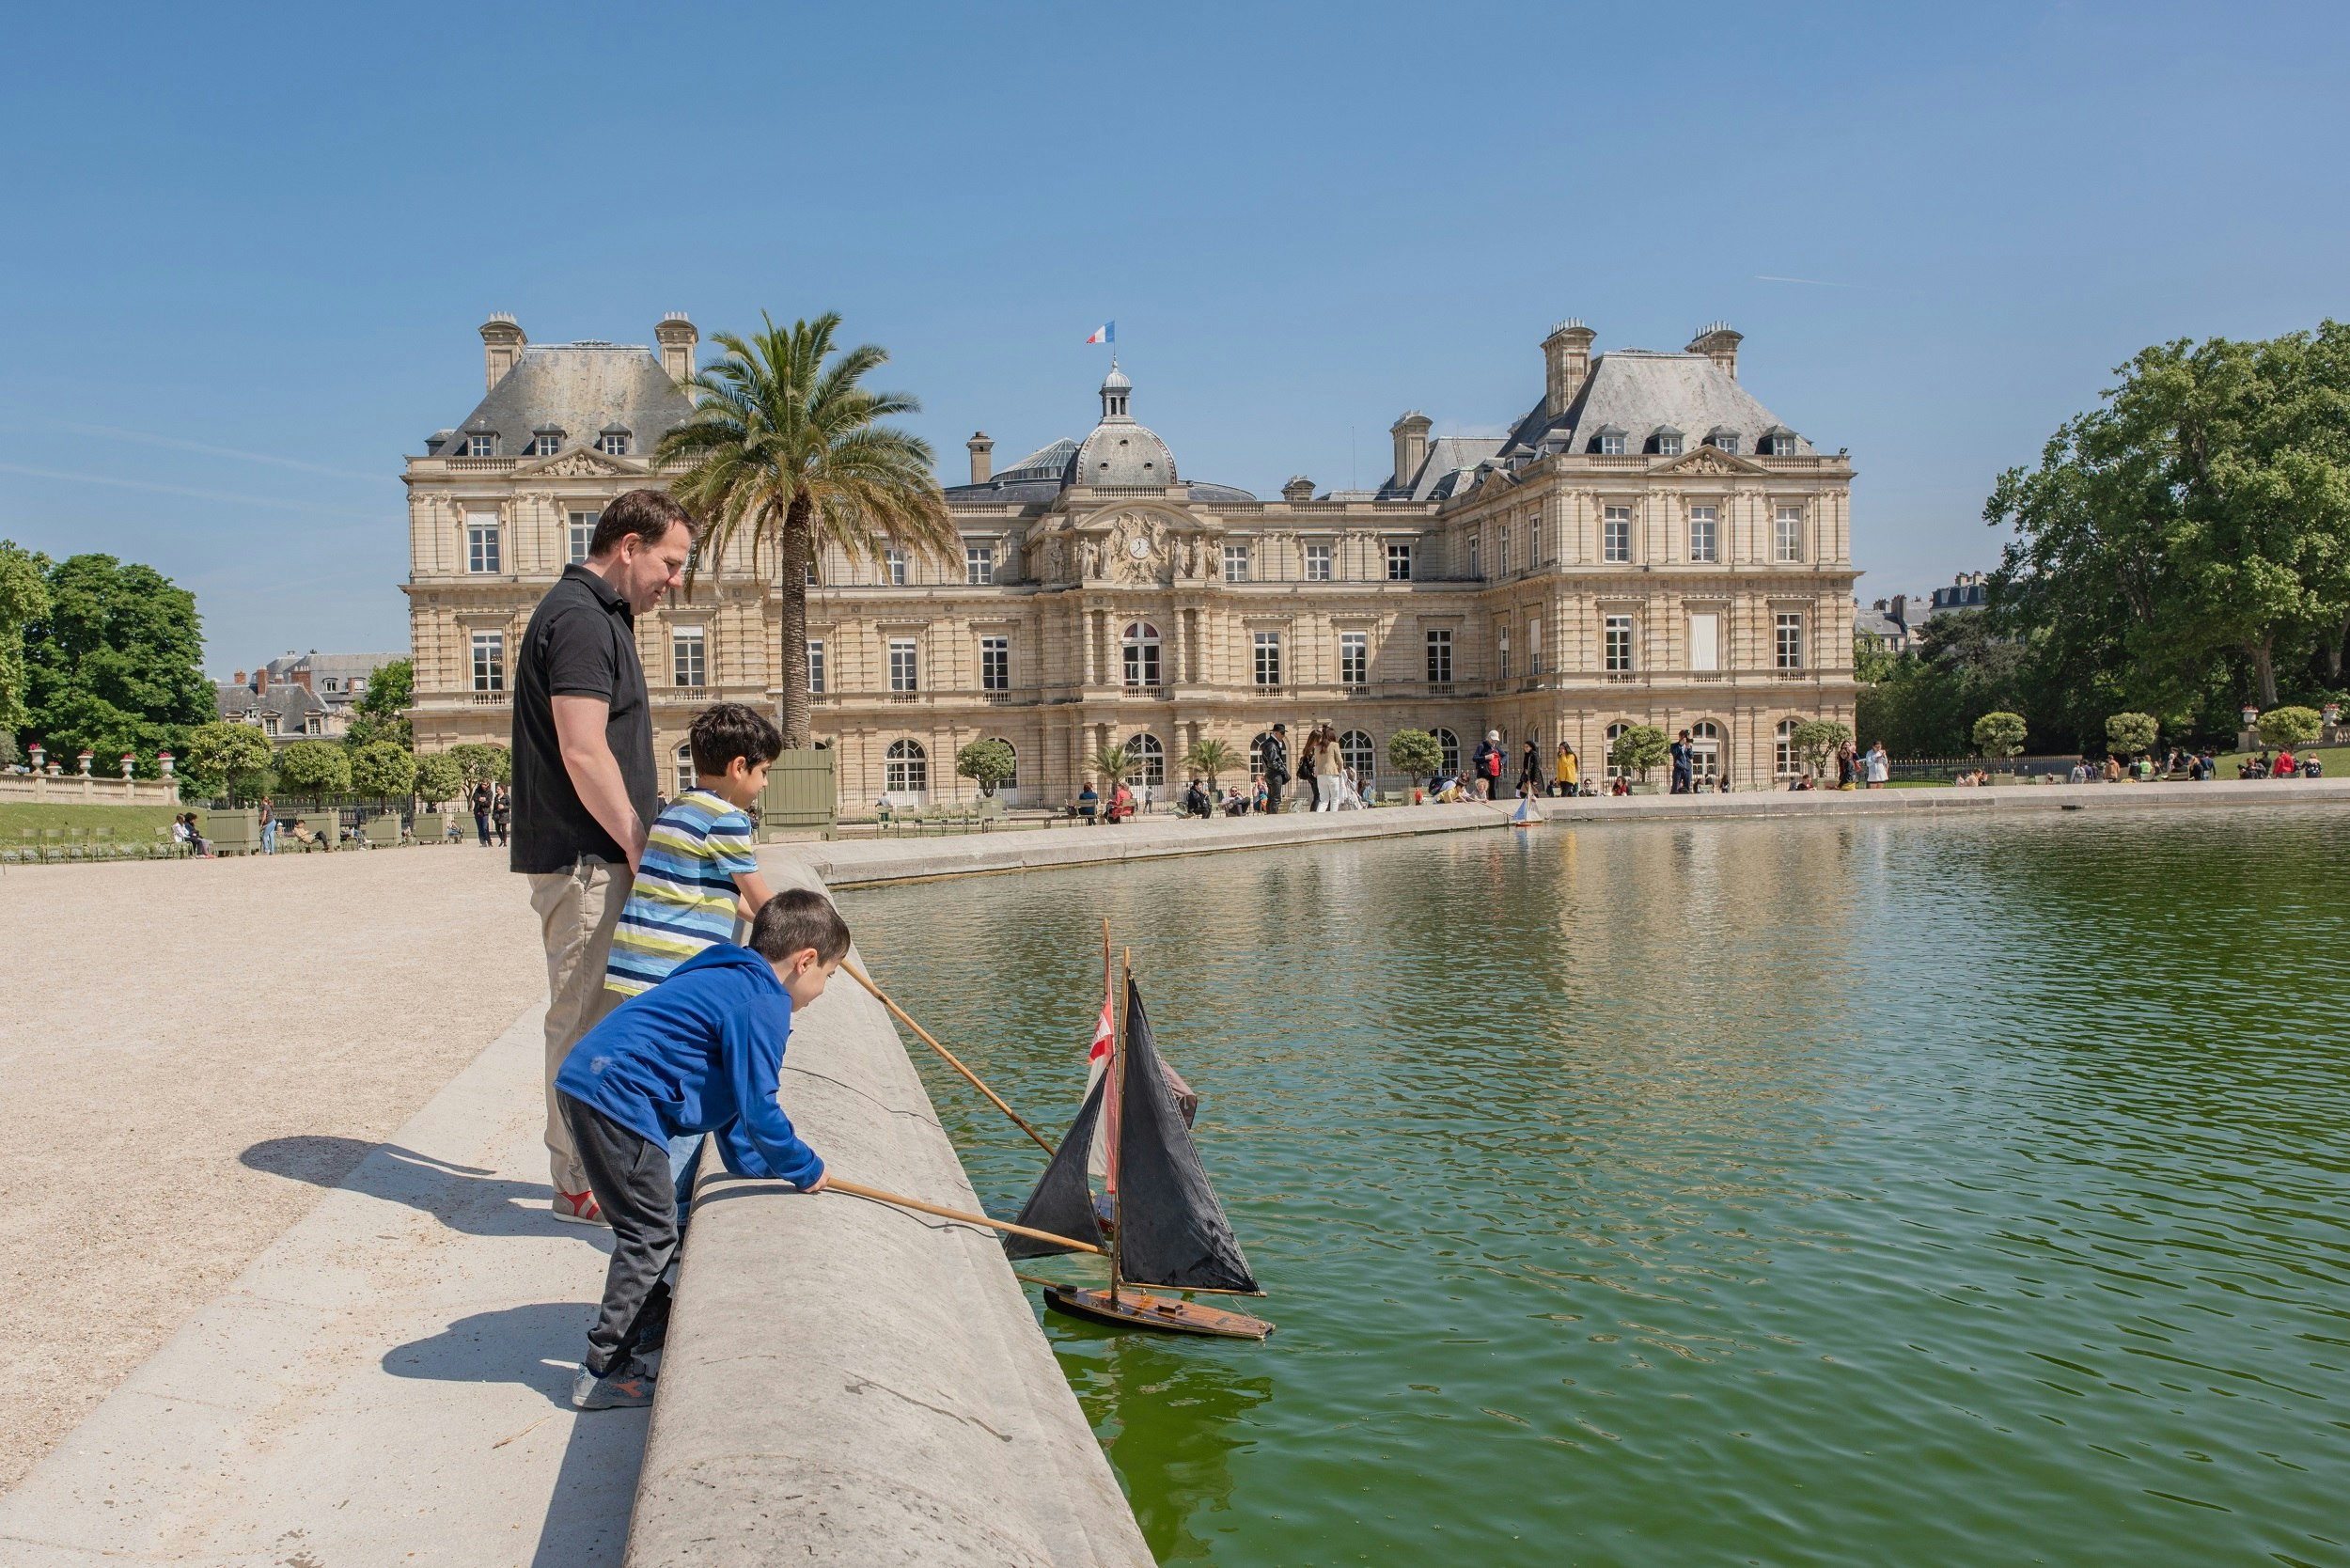 Children play with toy sail boats at the Luxembourg Palace and Gardens in the Montparnasse neighbourhood.